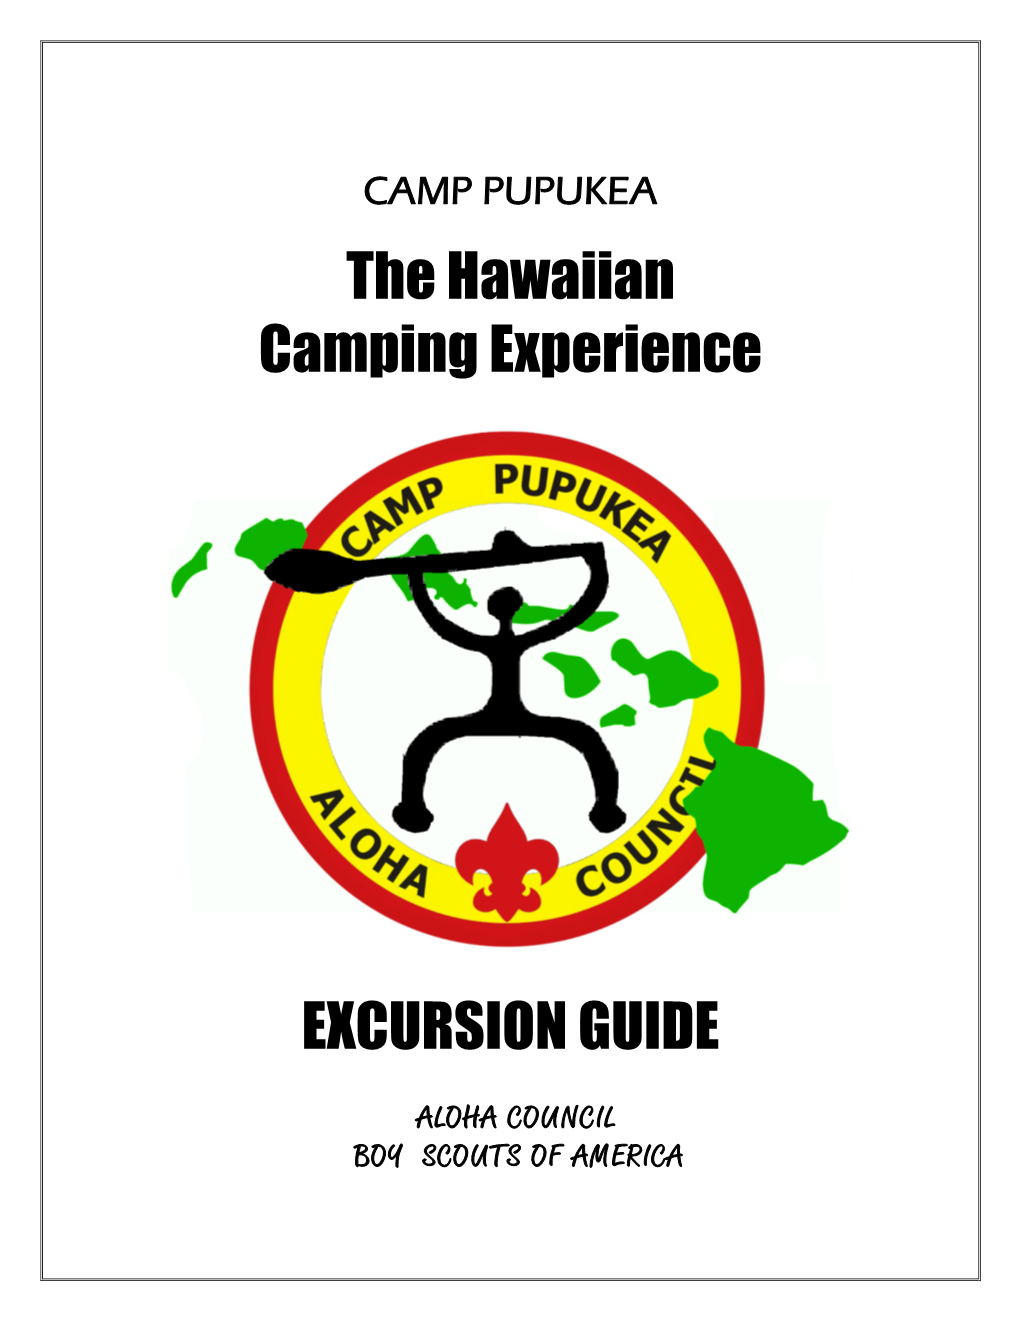 The Hawaiian Camping Experience EXCURSION GUIDE